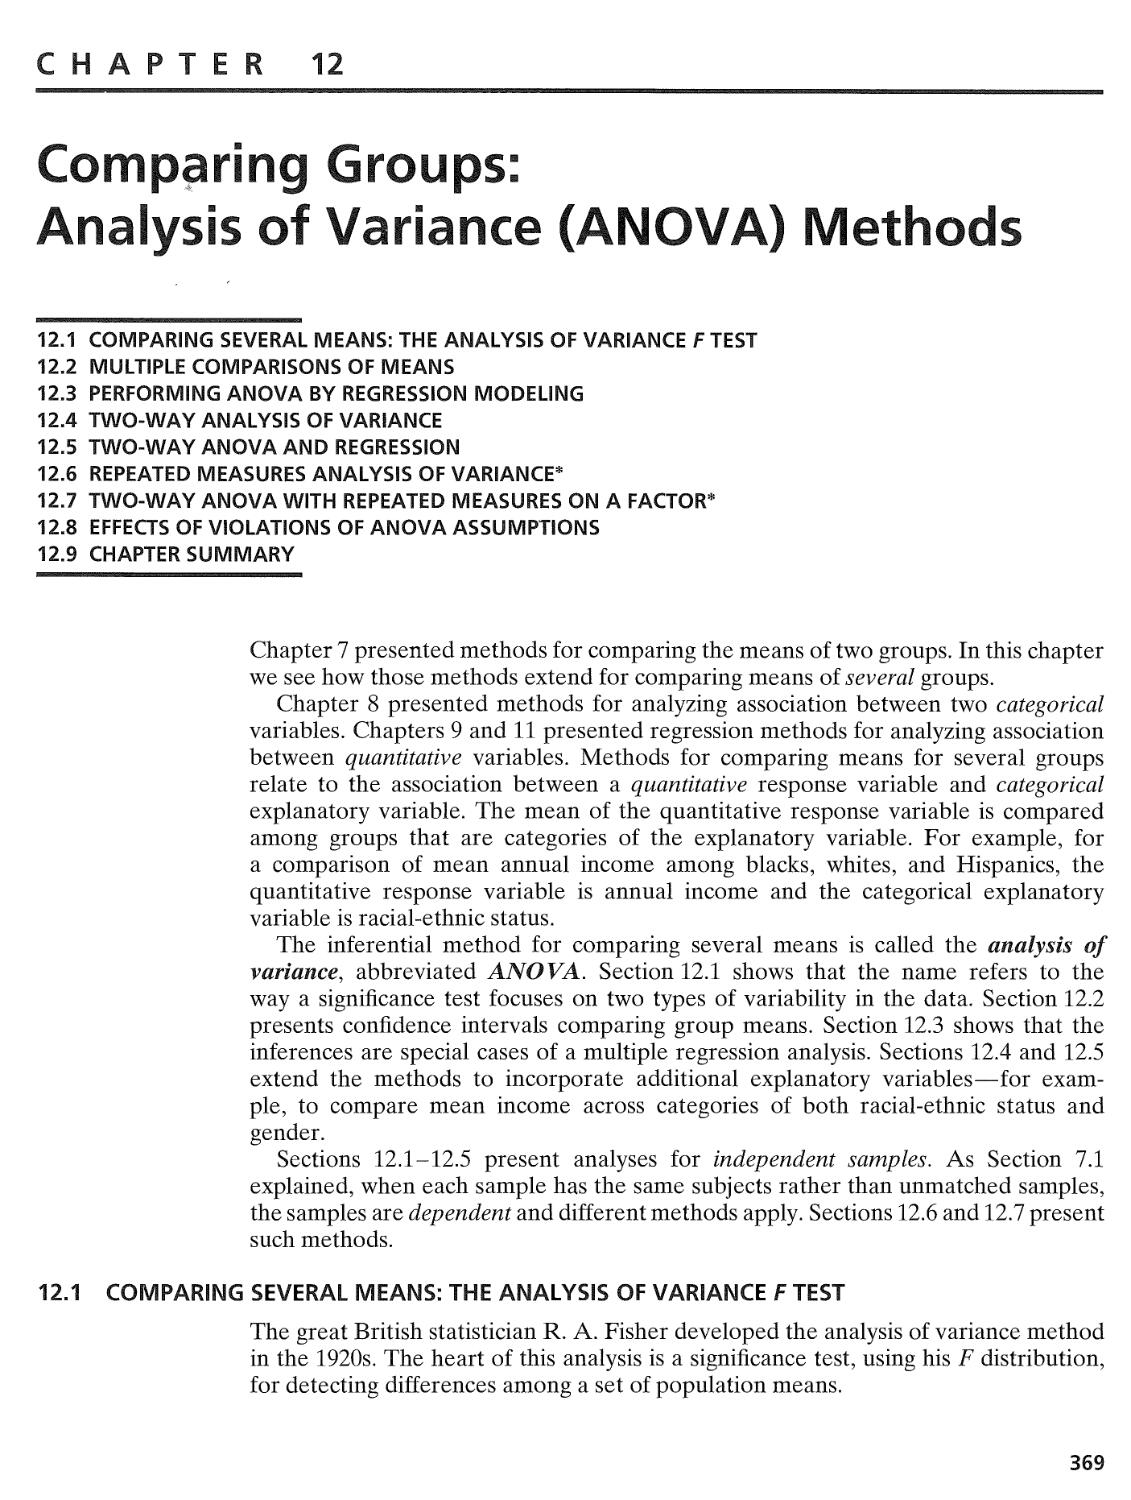 12.5 Two-Way ANOVA and Regression